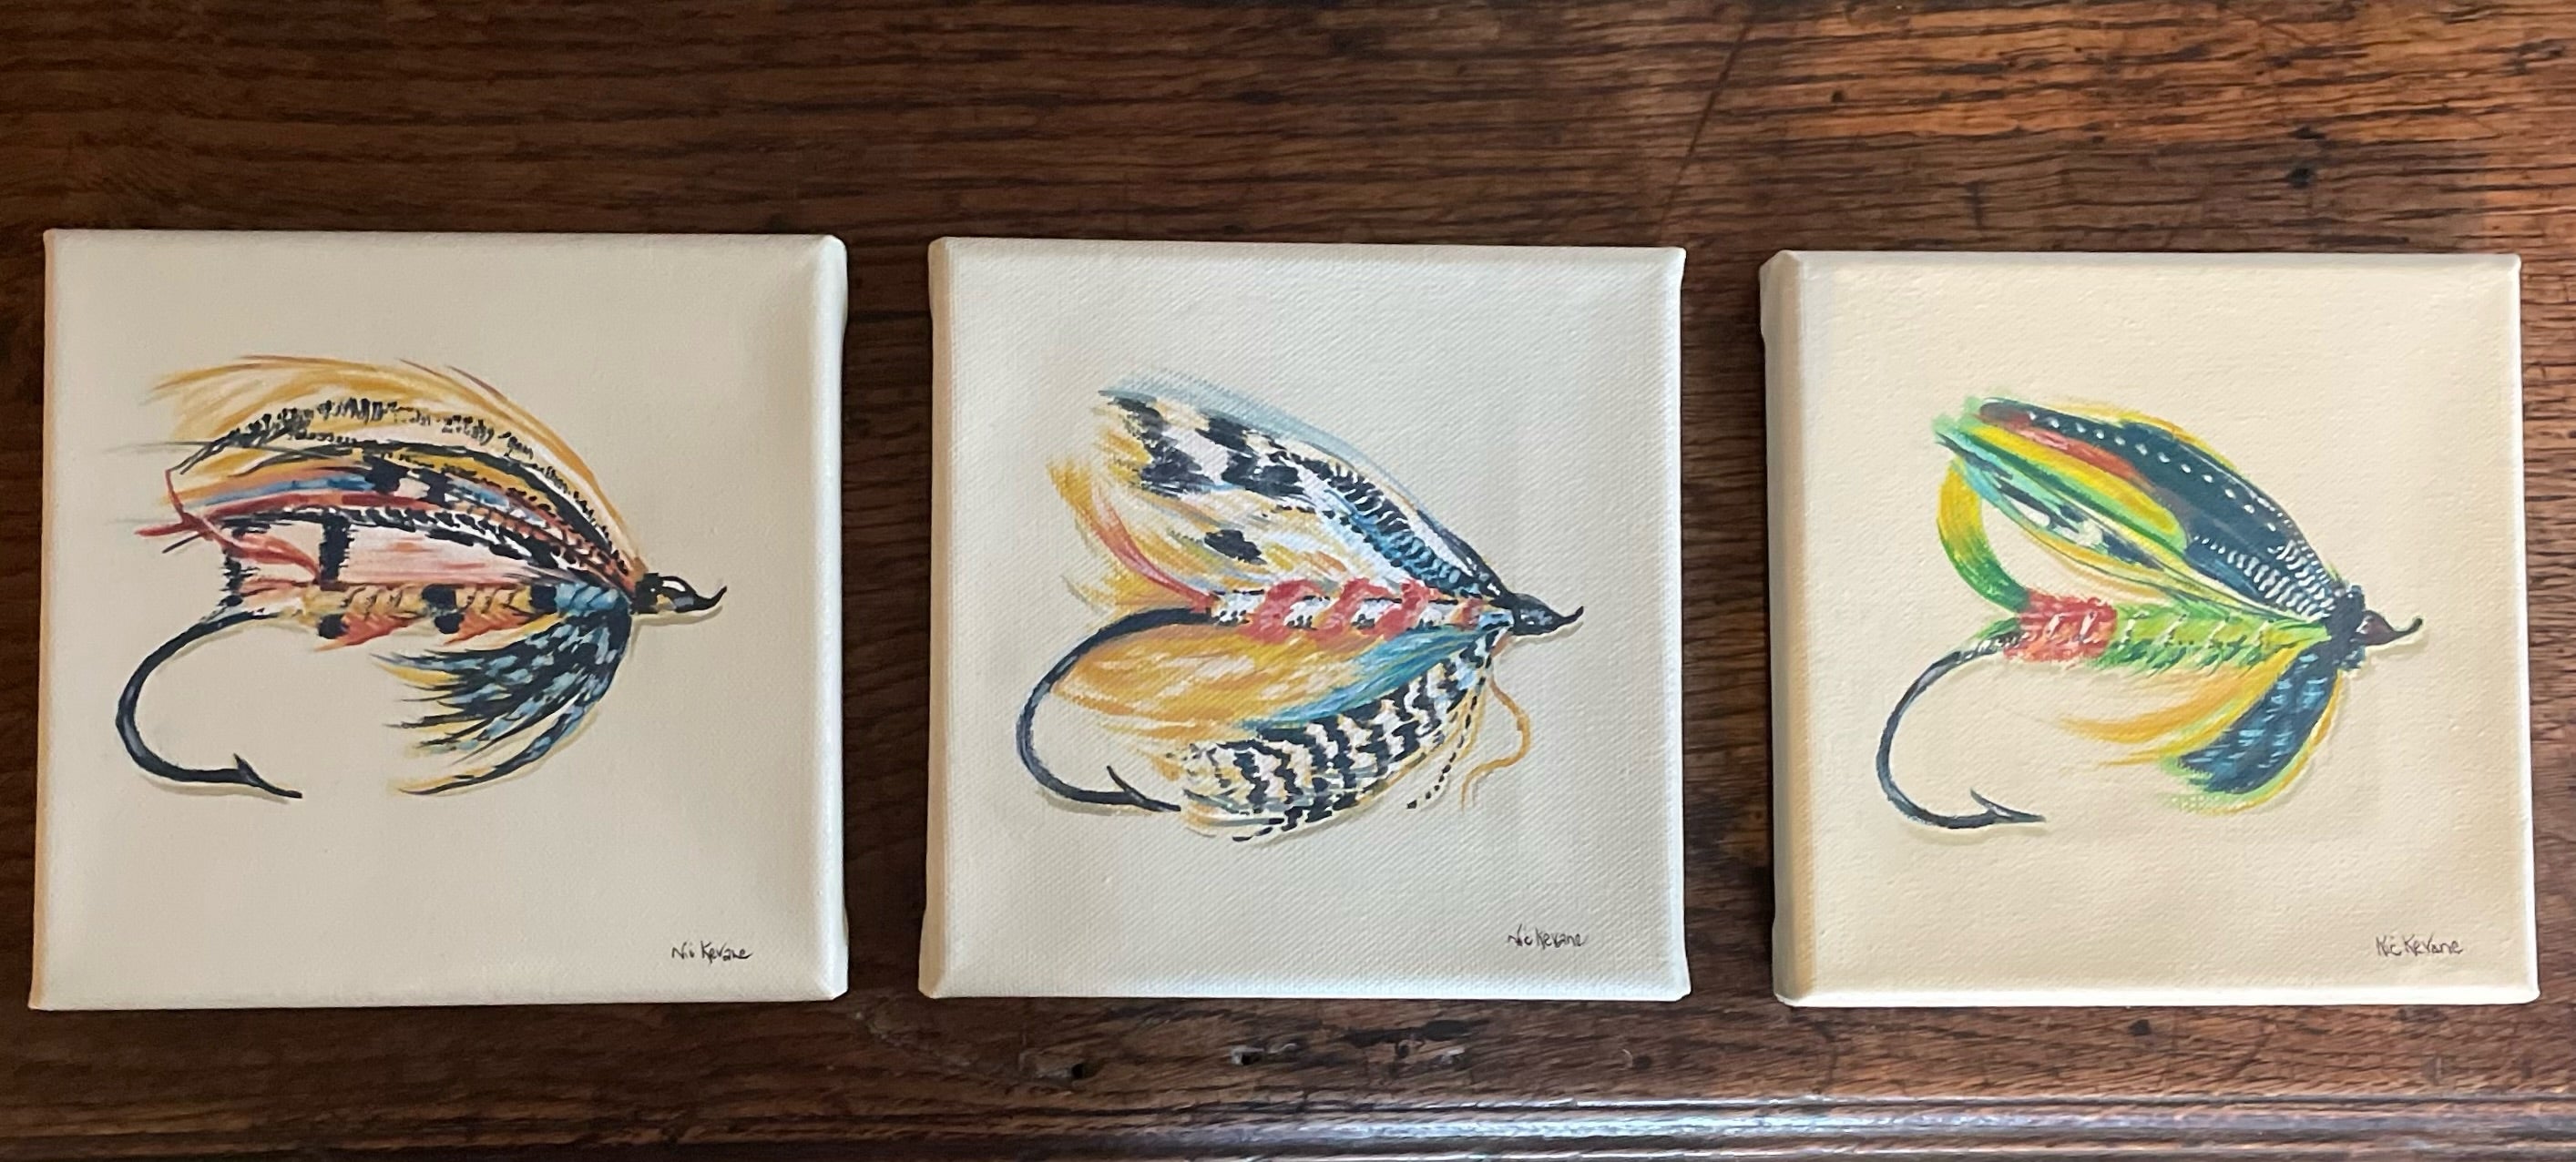 Fishing Fly - 15cm x 15cm mini paintings depicting various countryside subjects.